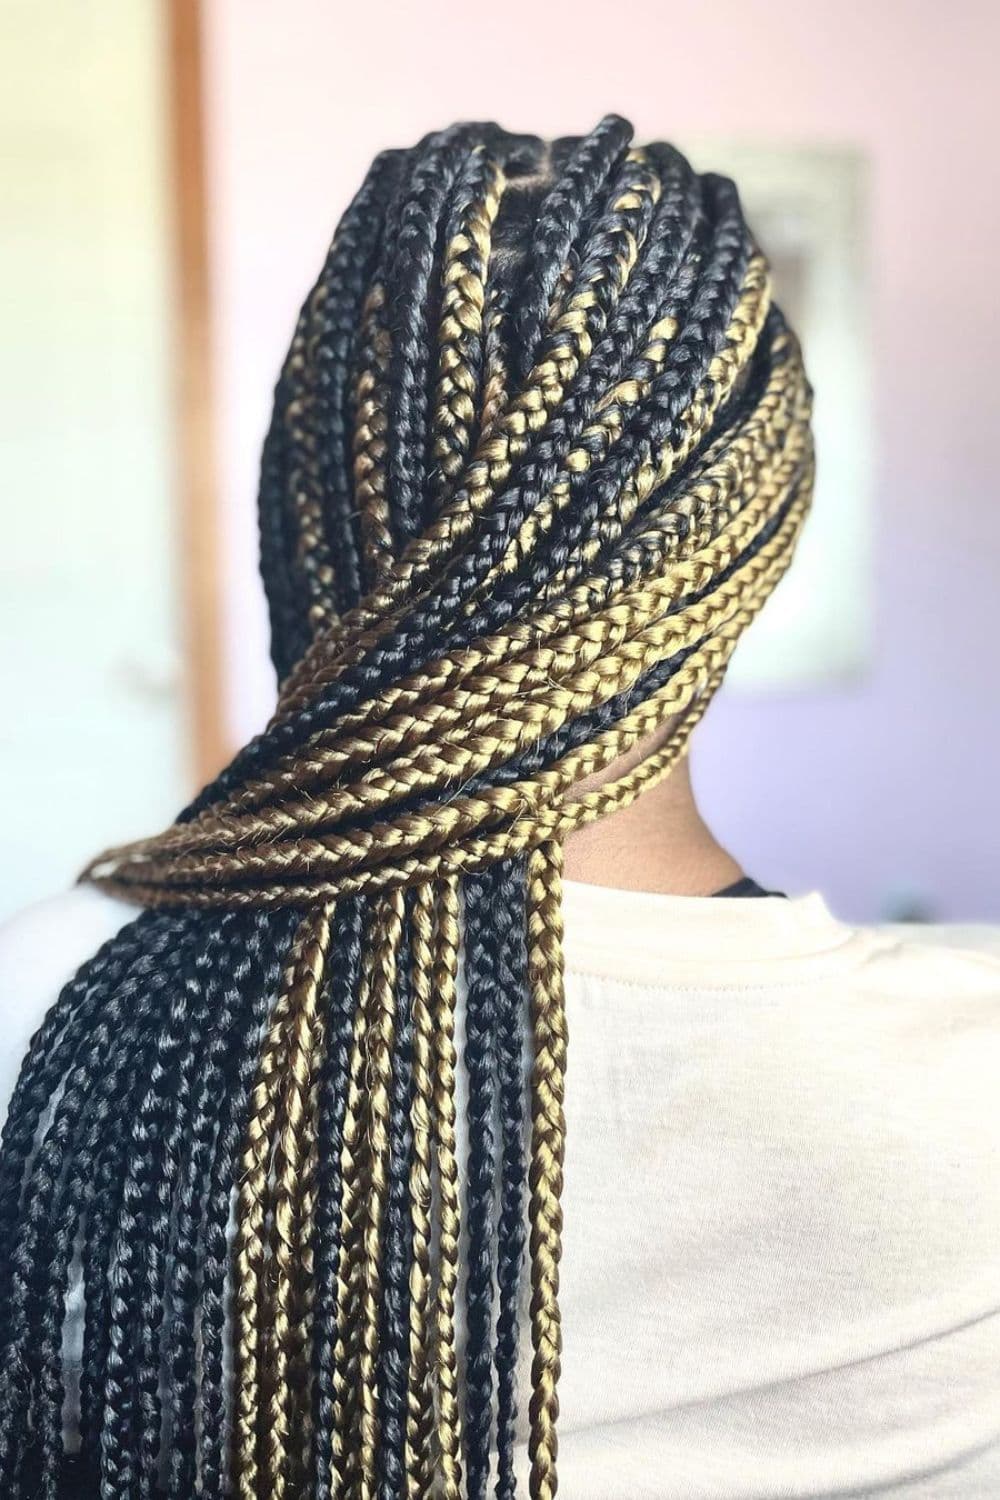 Back of a person with gold and black box braids.